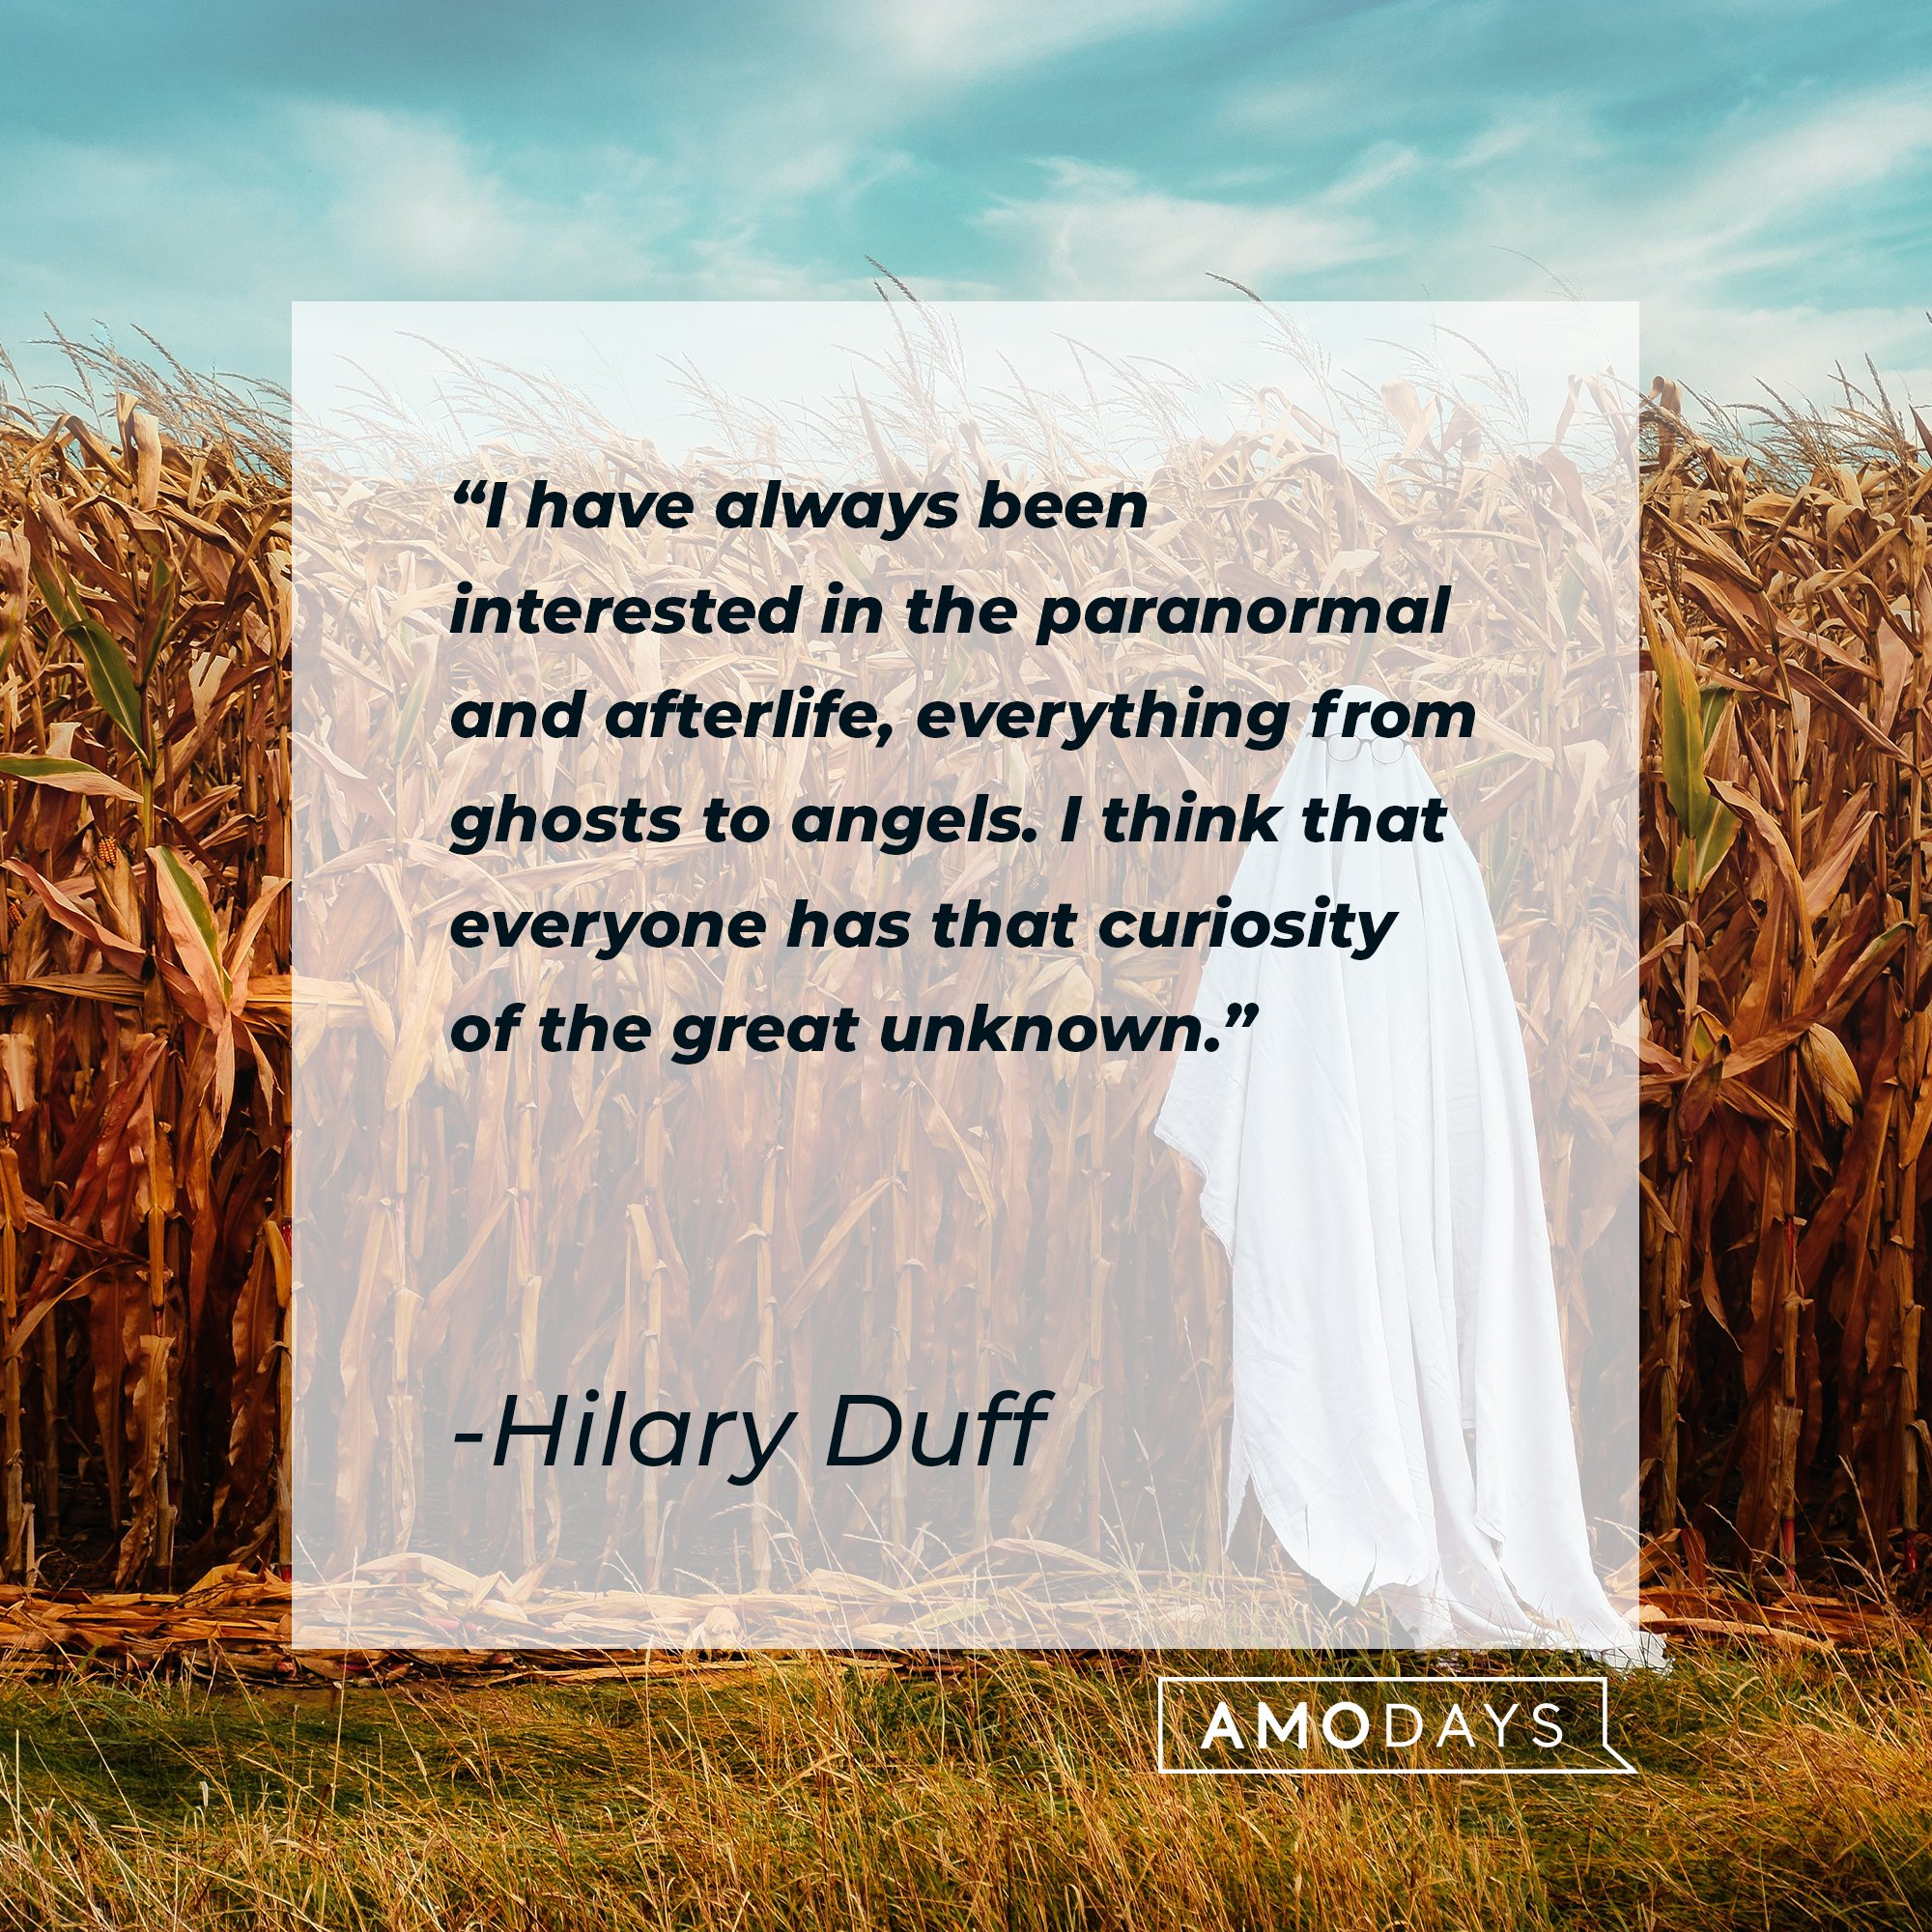 Hilary Duff’s quote: "I have always been interested in the paranormal and afterlife, everything from ghosts to angels. I think that everyone has that curiosity of the great unknown." | Image: AmoDays 